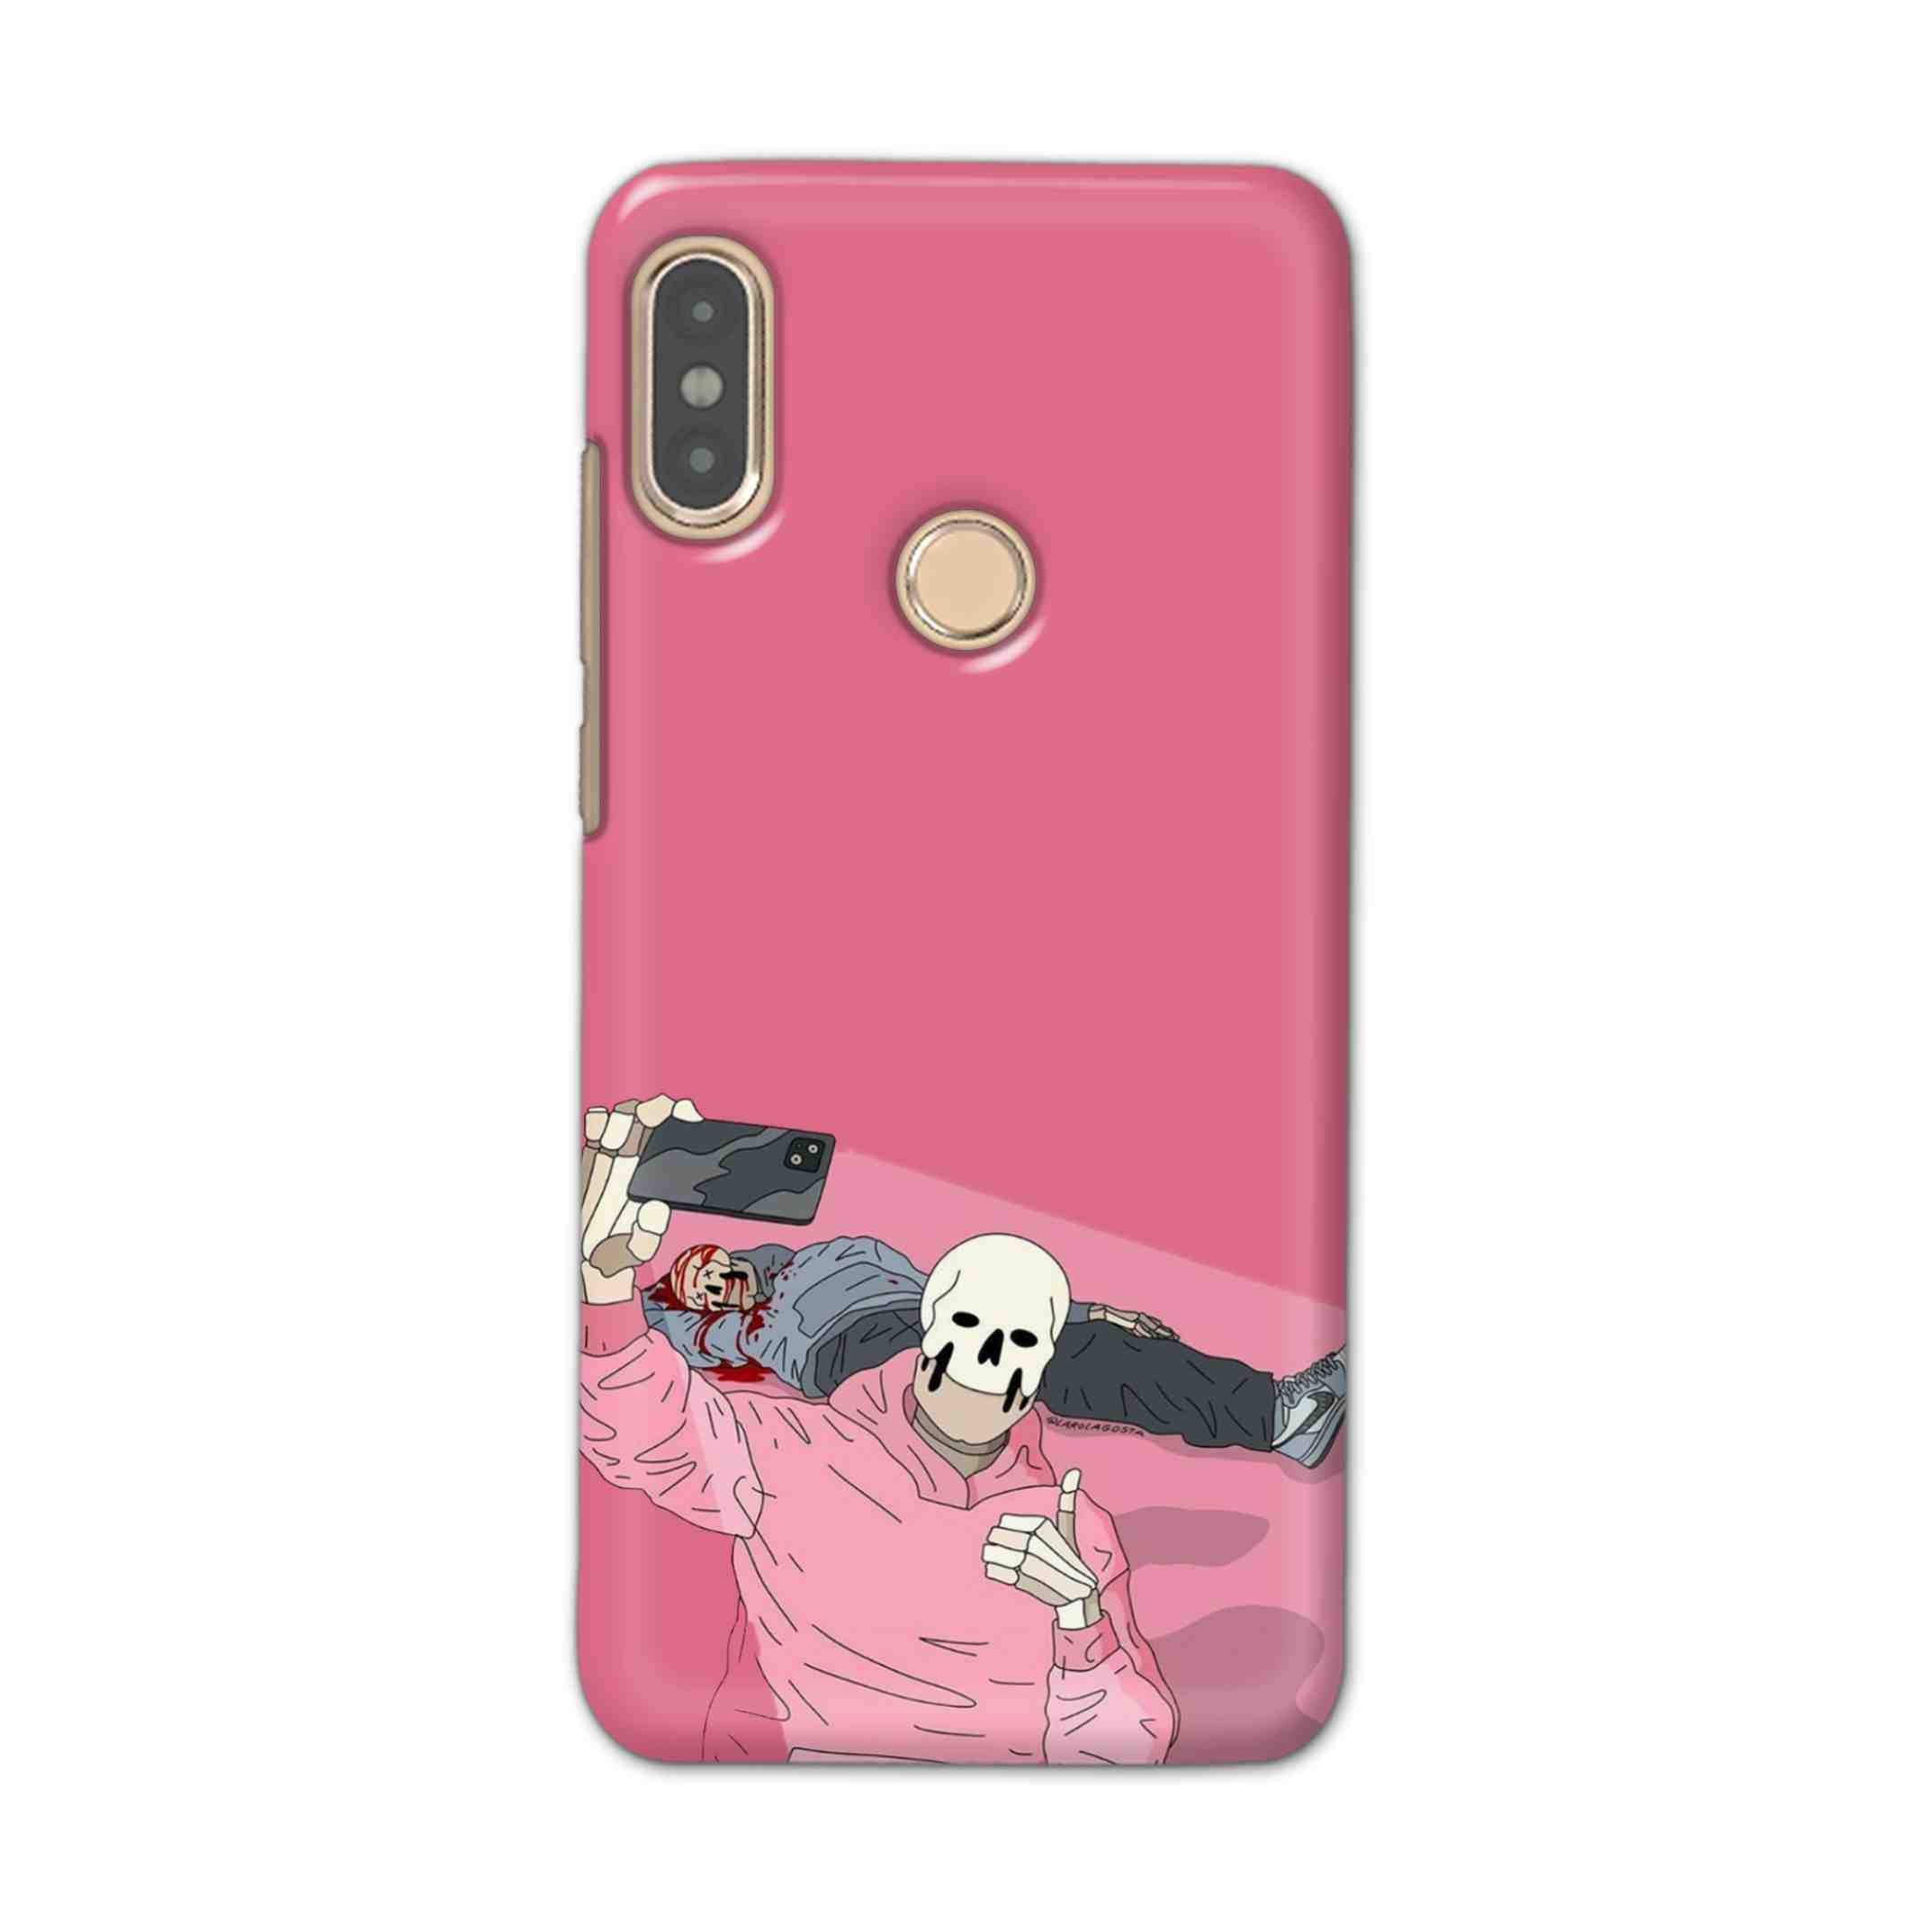 Buy Selfie Hard Back Mobile Phone Case Cover For Xiaomi Redmi Note 5 Pro Online